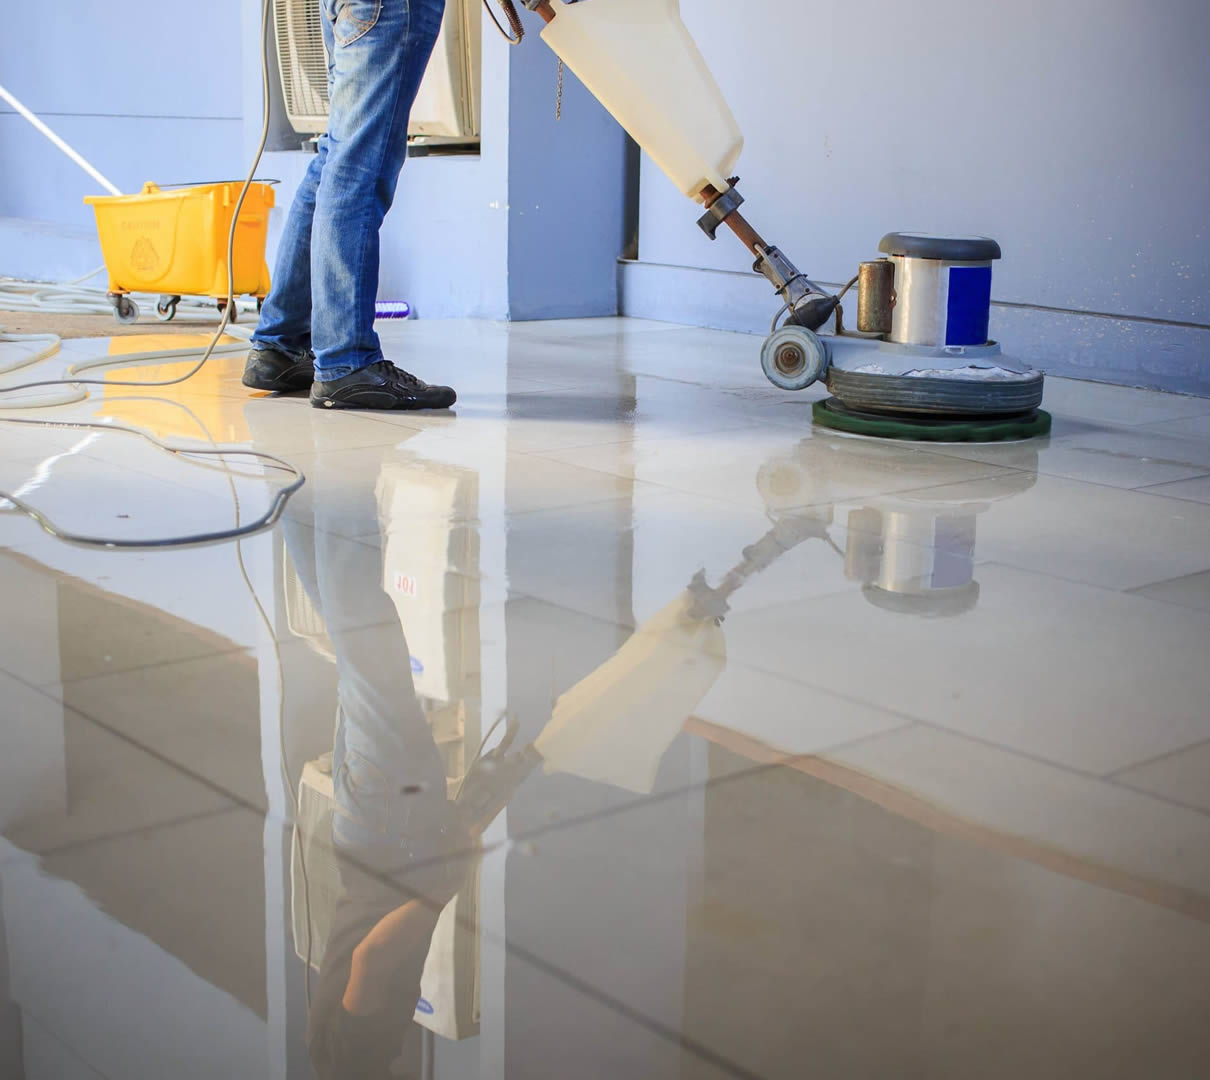 Strata buildings require very different services and cleaning solutions